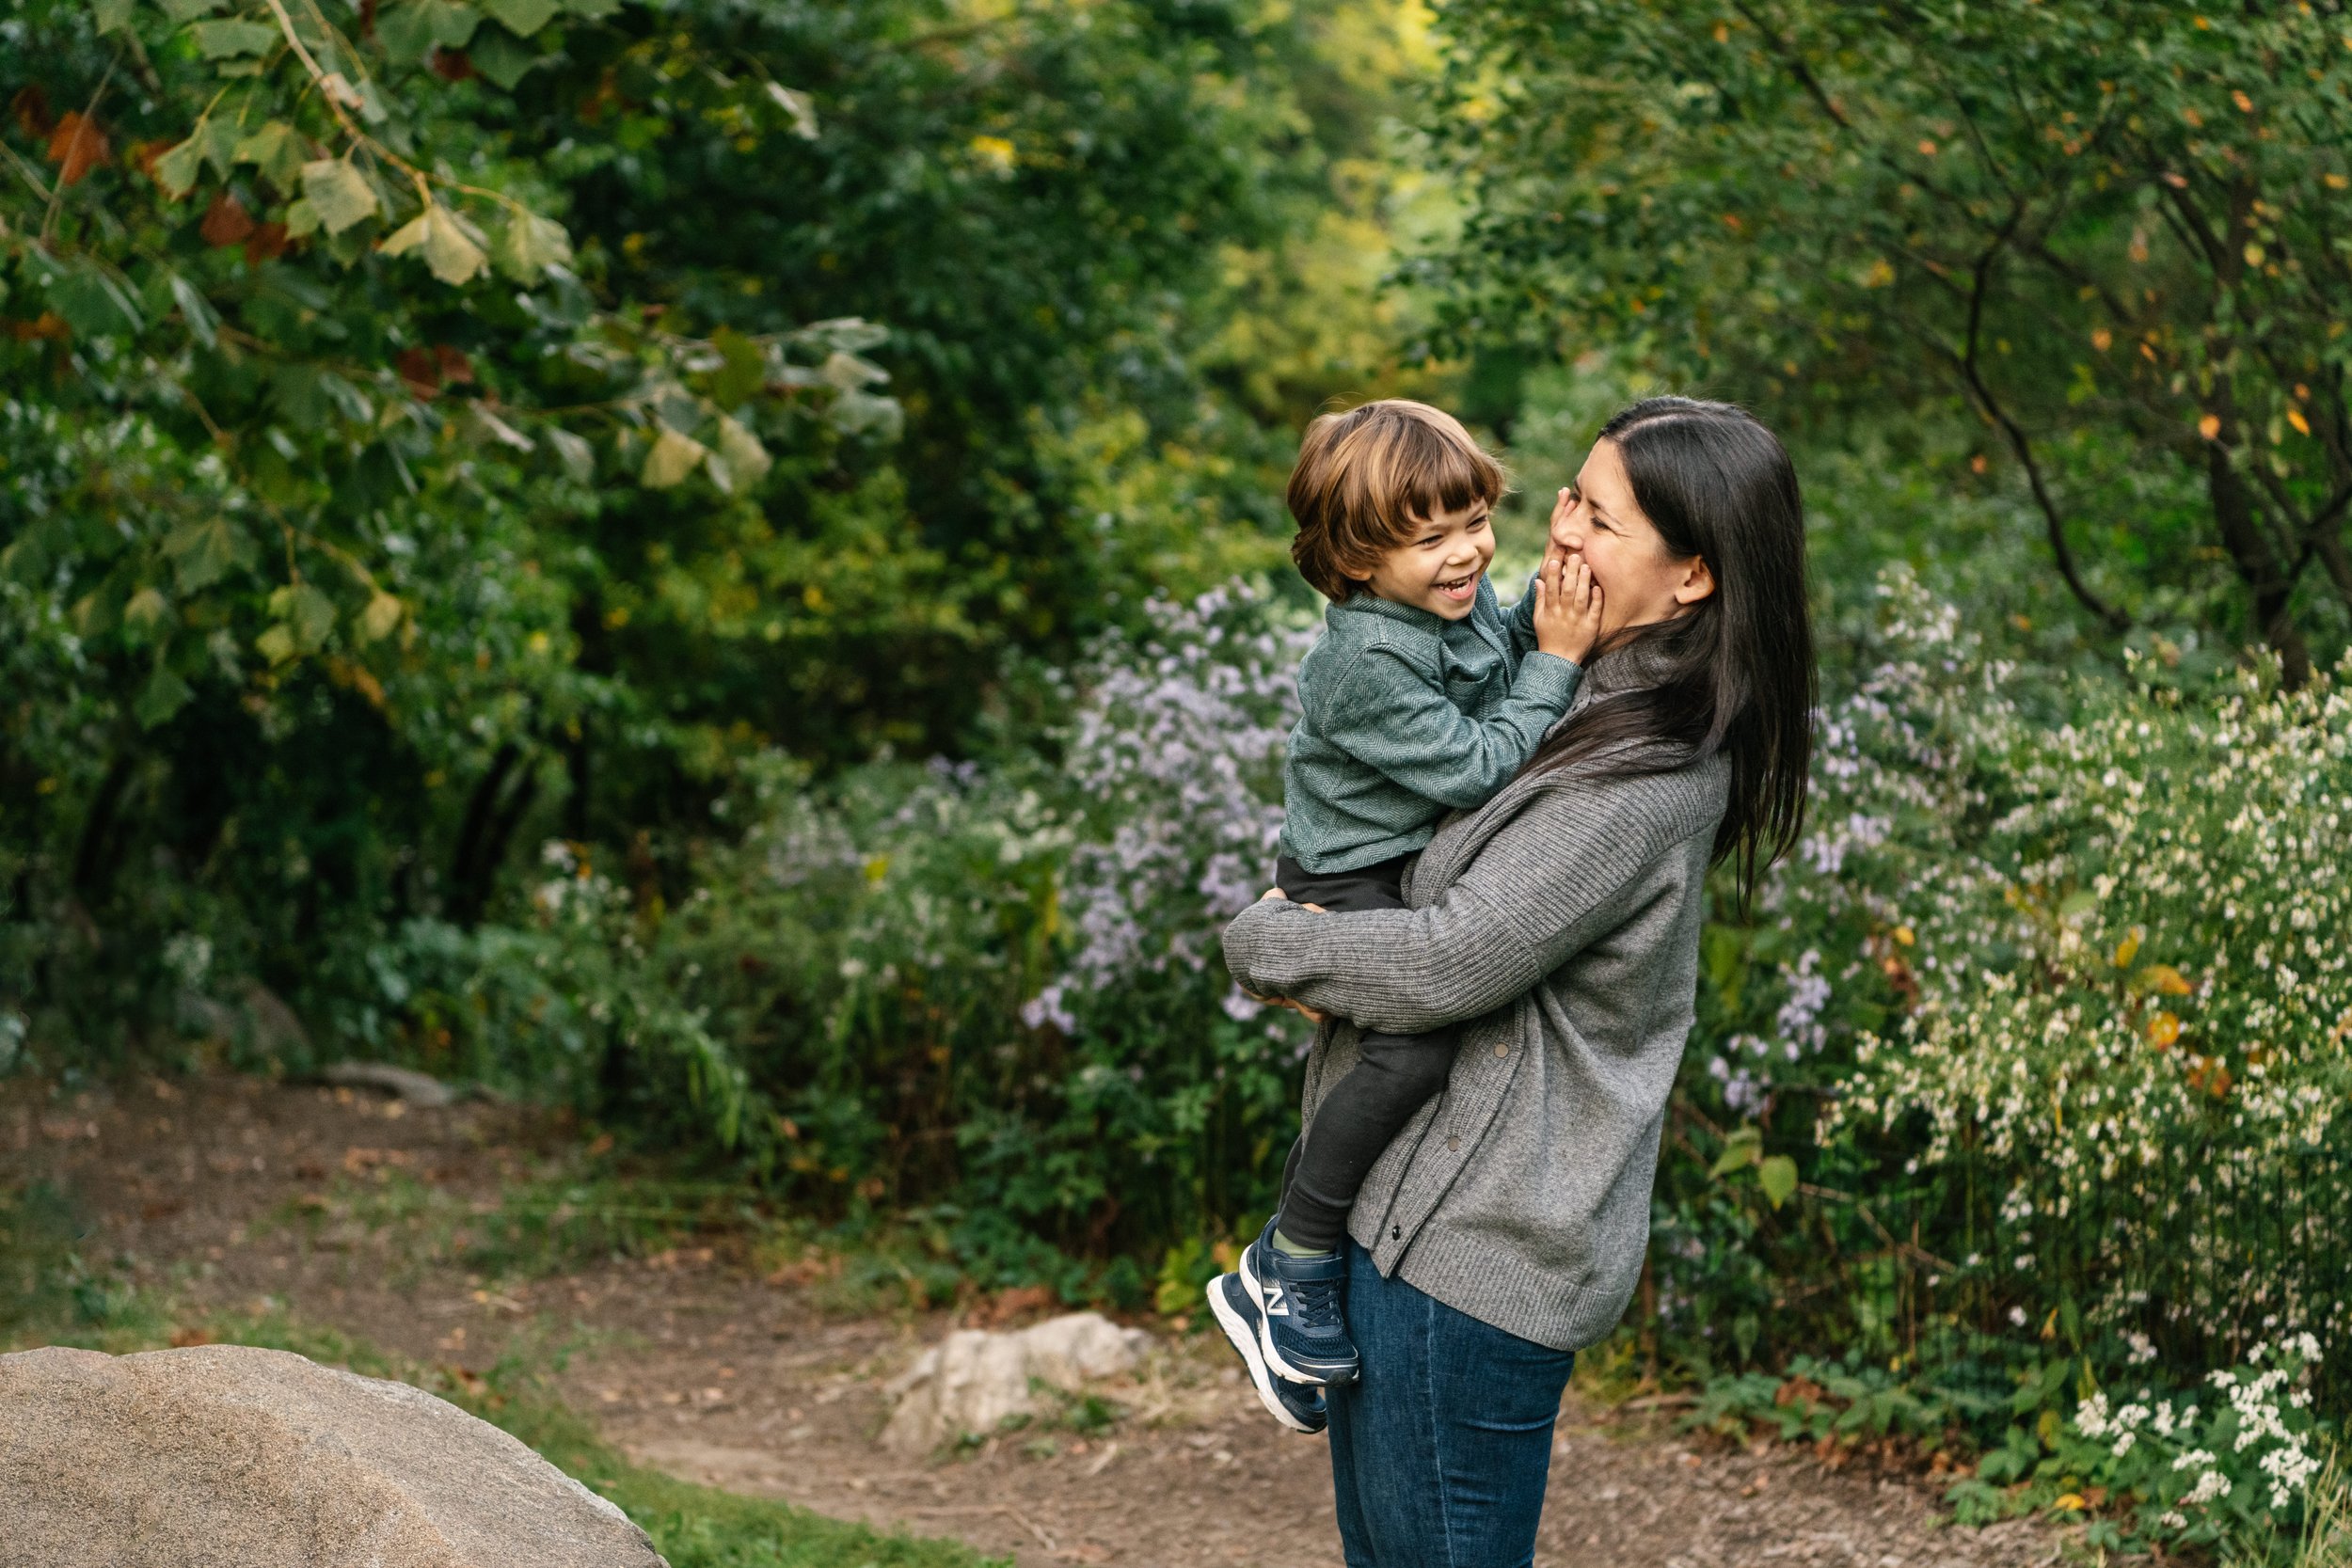  New York Central Park family portraits featuring a mother in casual attire holding her little boy with brown hair by Nicole Hawkins Photography. casual family pictures green background #NicoleHawkinsPhotography #NicoleHawkinsFamilies #NJphotographer